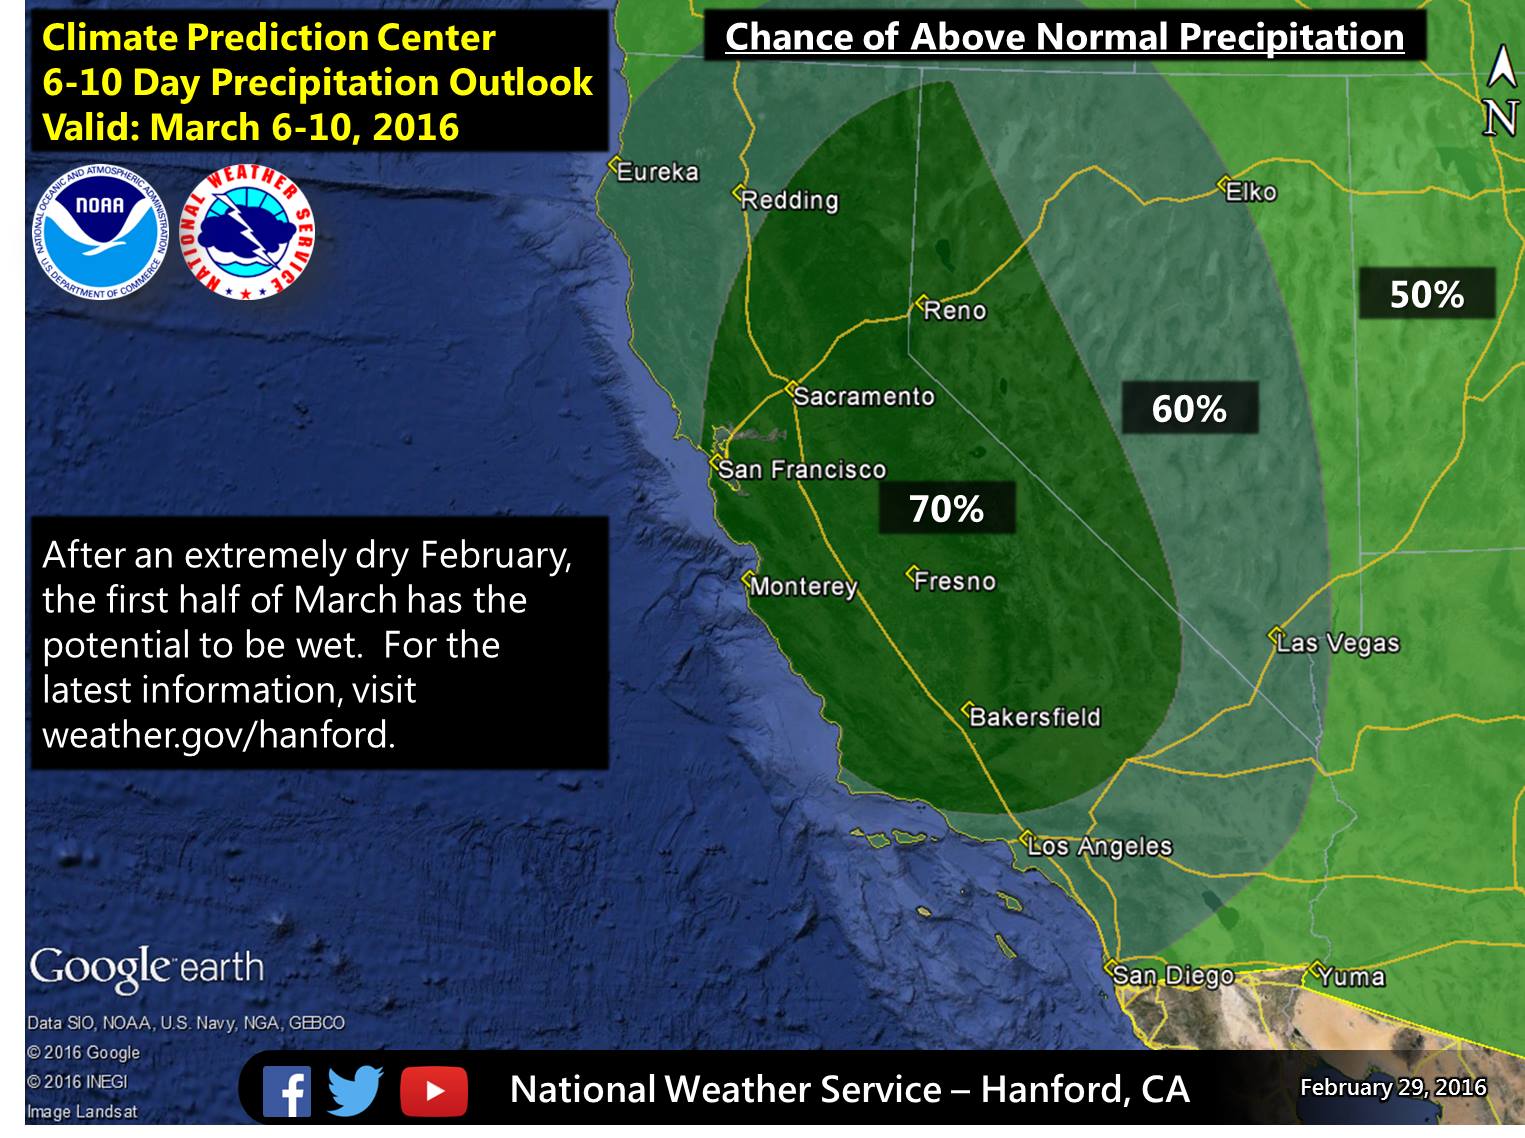 "Confidence continues to grow for above average precipitation in early March." - NOAA Hanford, CA today